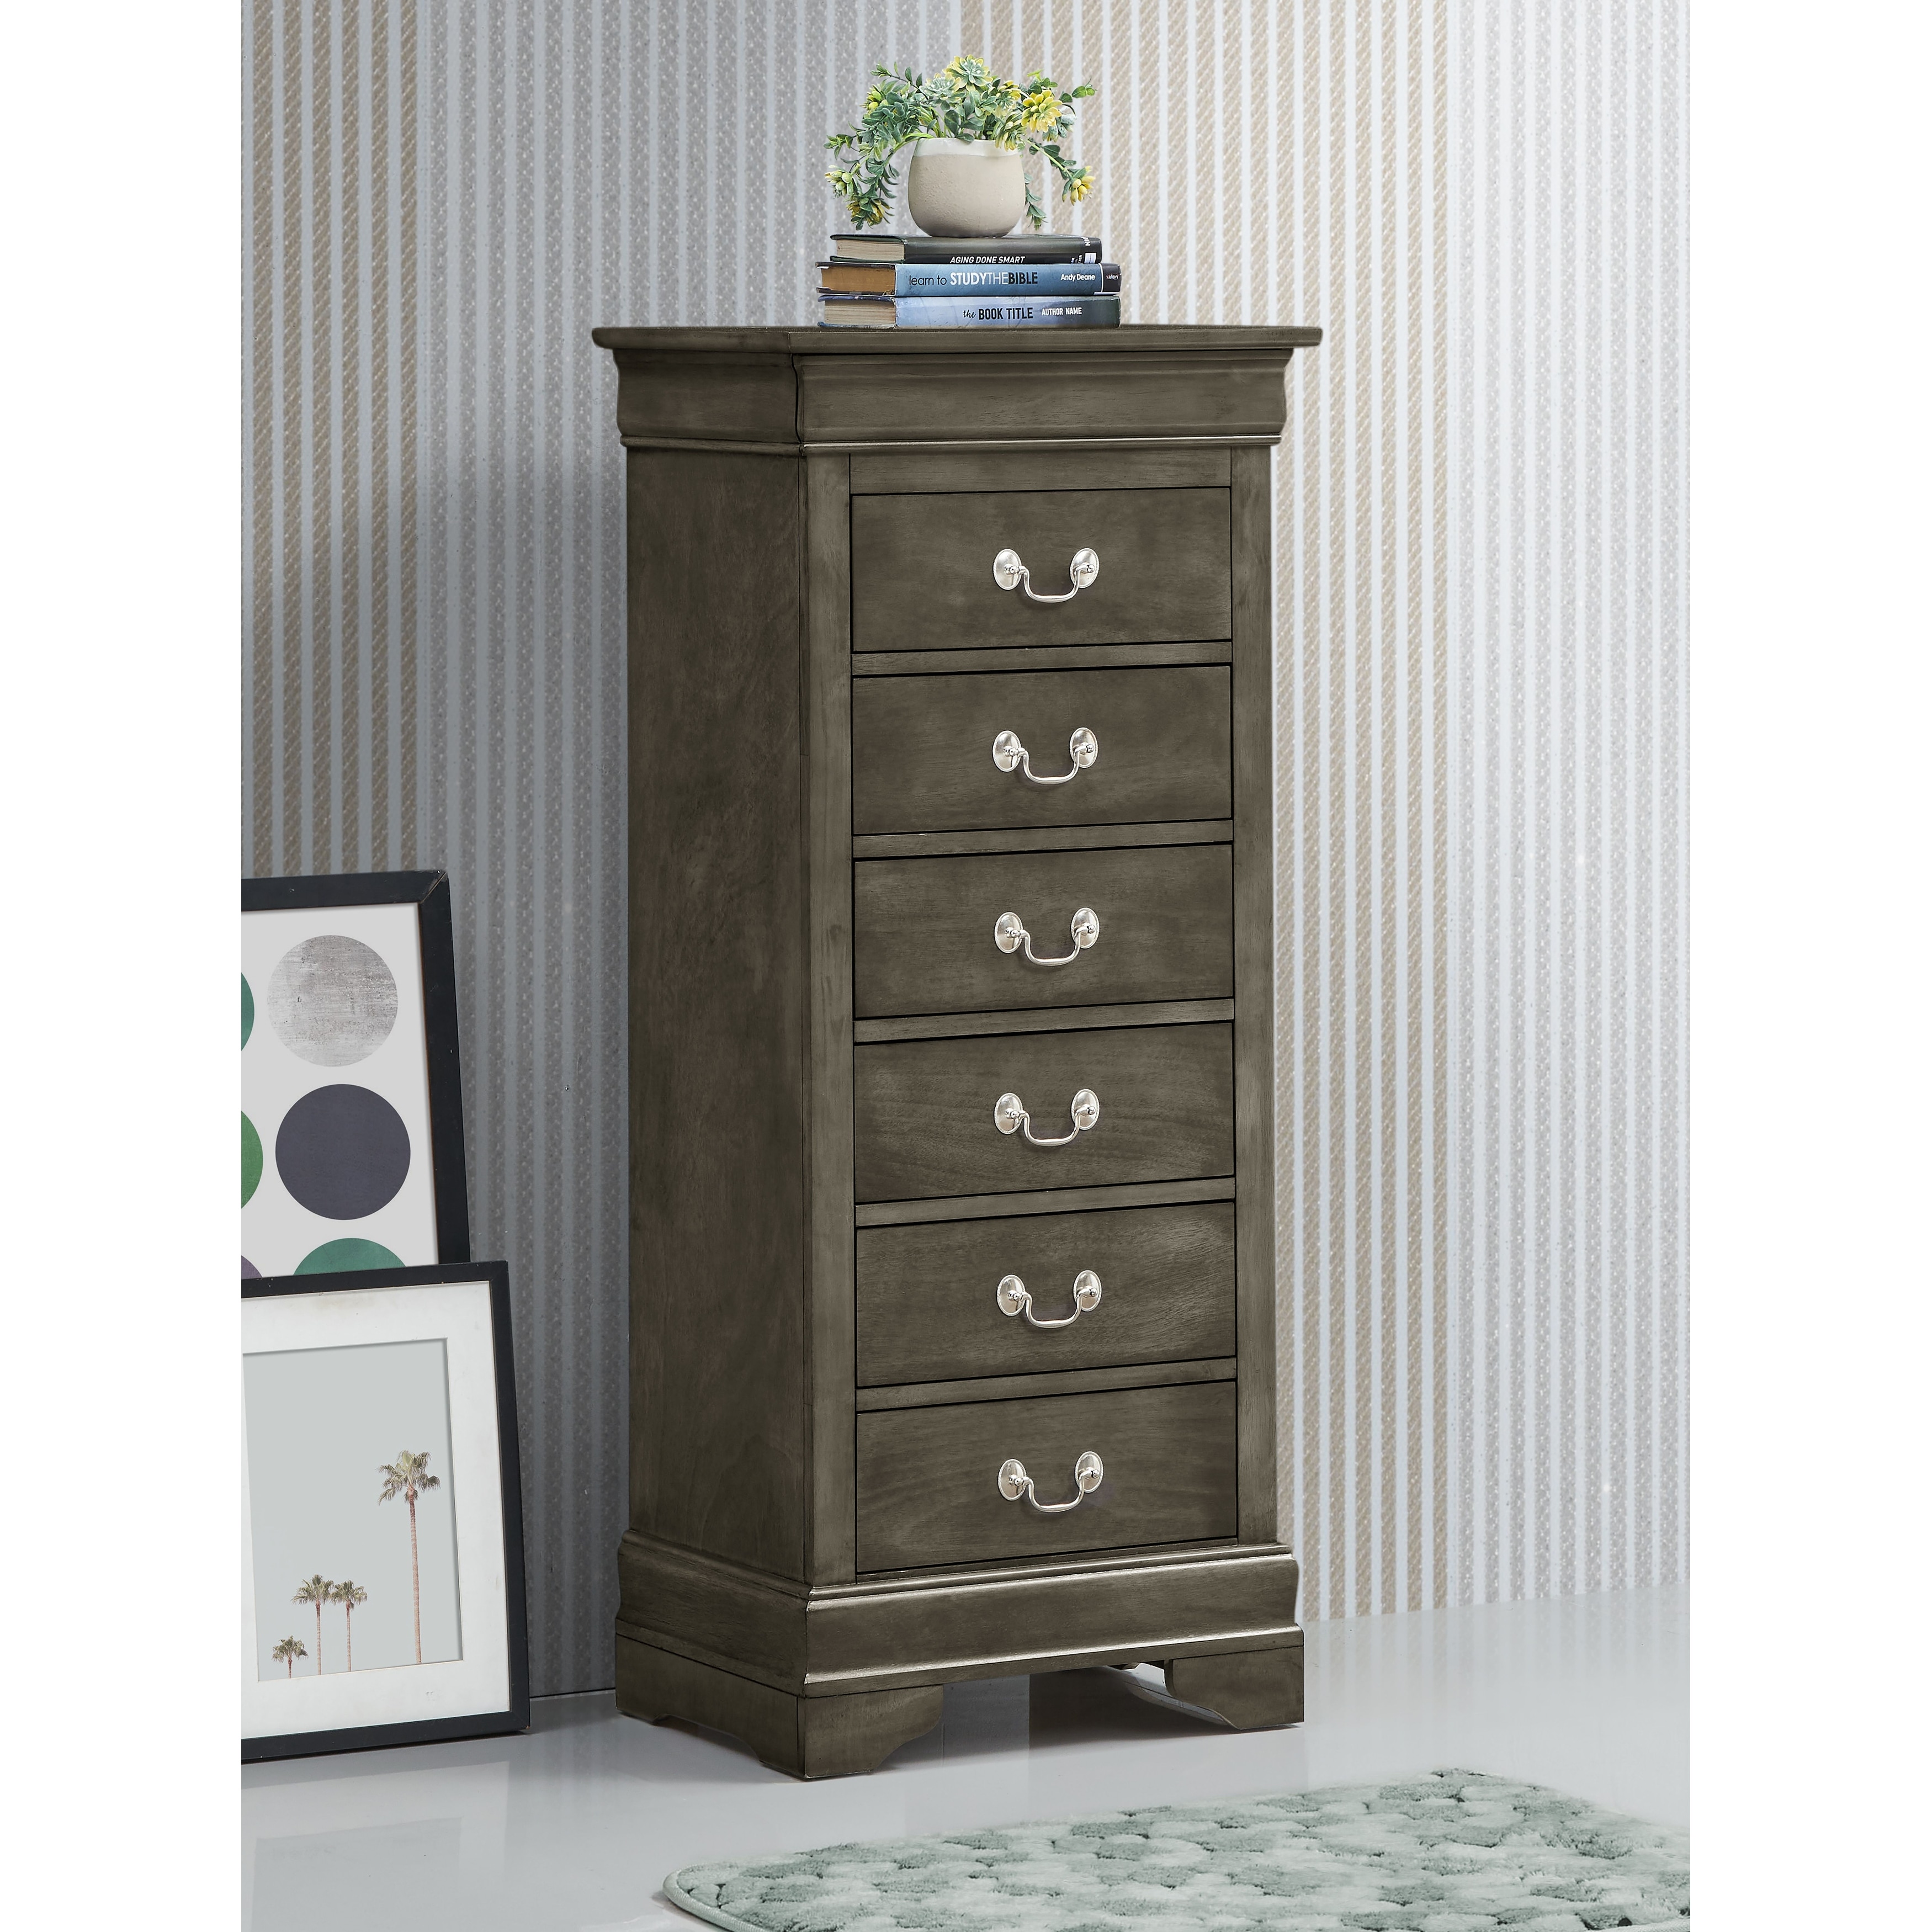  Glory Furniture Louis Phillipe 3 Drawer Nightstand in  Cappuccino : Home & Kitchen